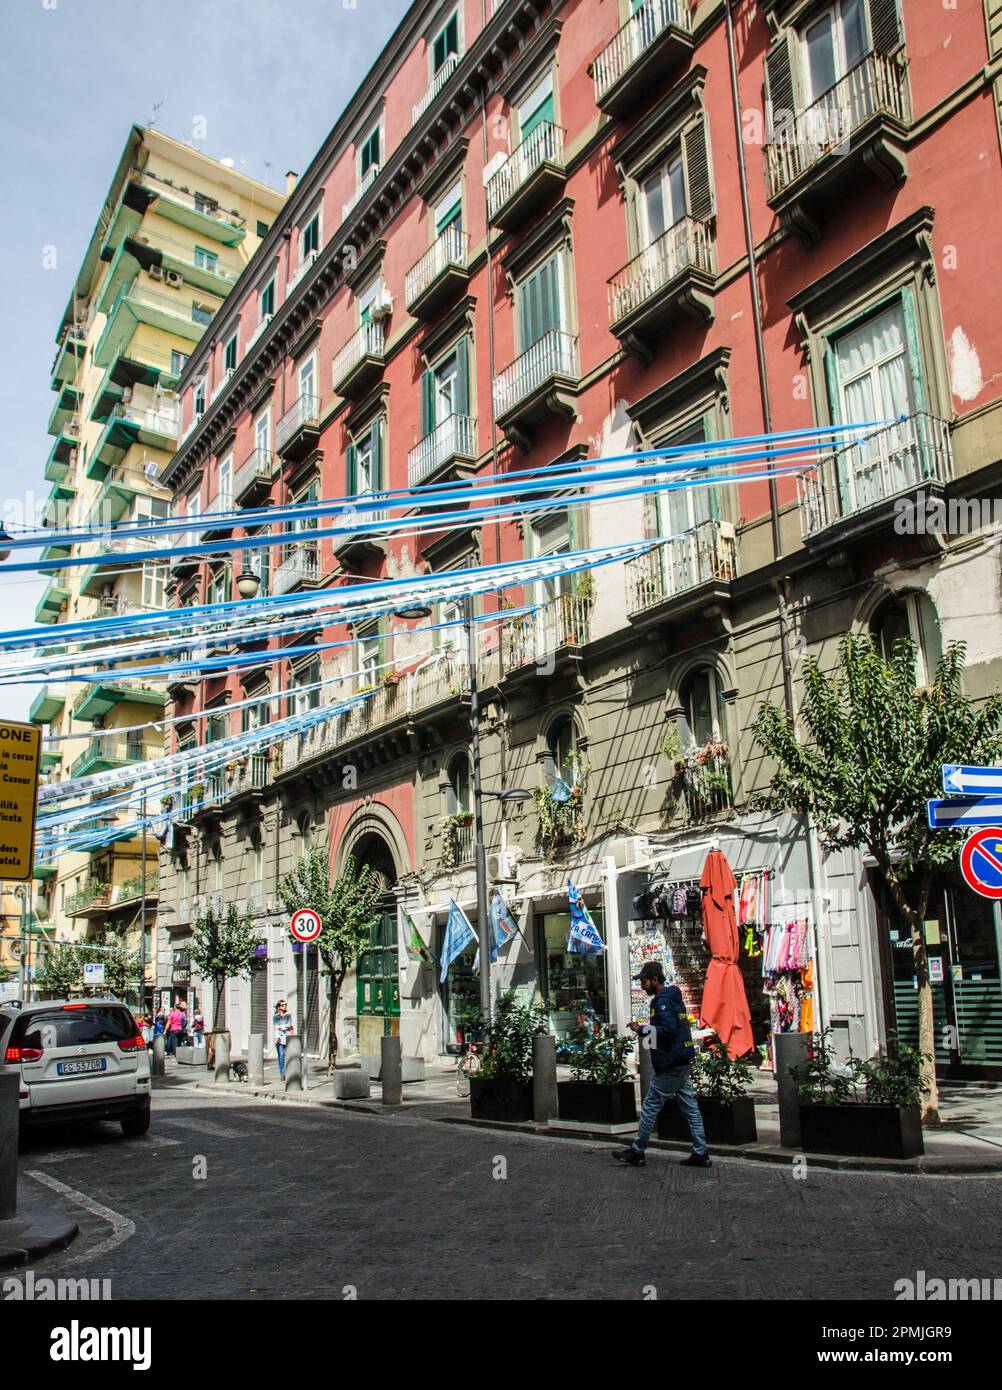 April 2, 2023, Naples, Italy:  Celebratory blue and white bunting and streamers marking the success of the S.S.C. Napoli football team.  Via Duomo, Ce Stock Photo